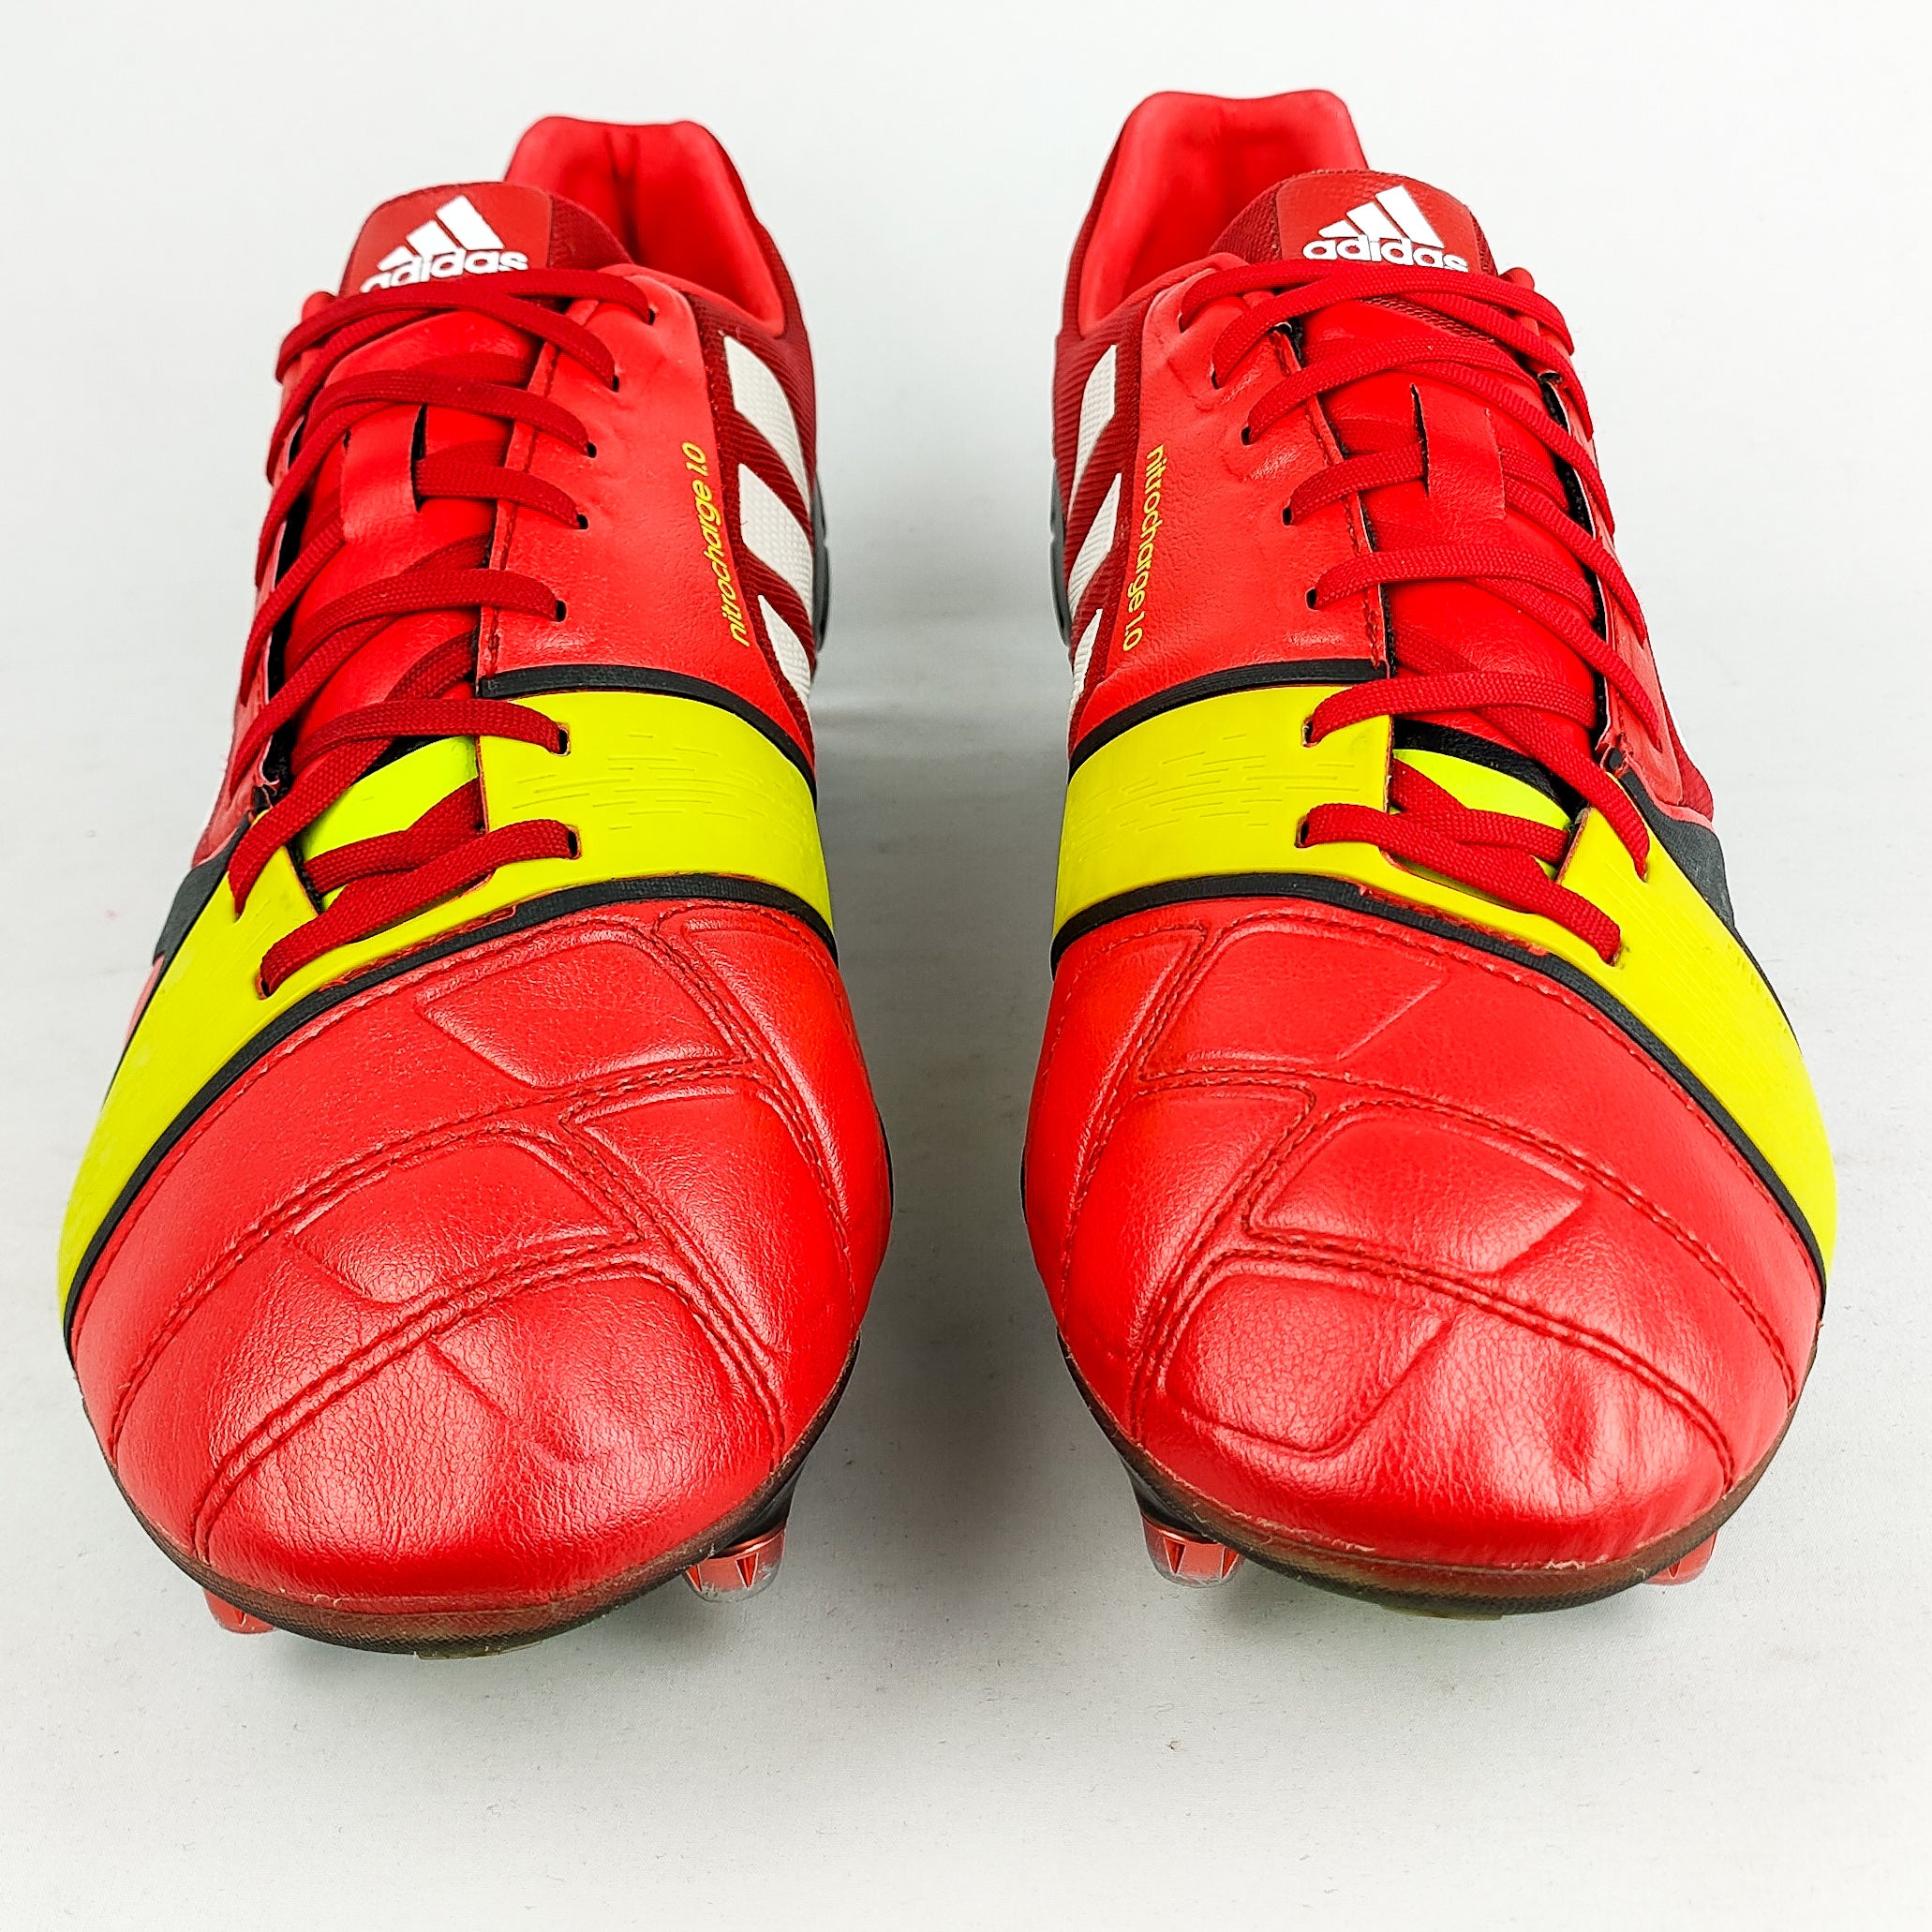 Adidas Nitrocharge 1.0 SG - Red/Electricity Yellow/Black/White